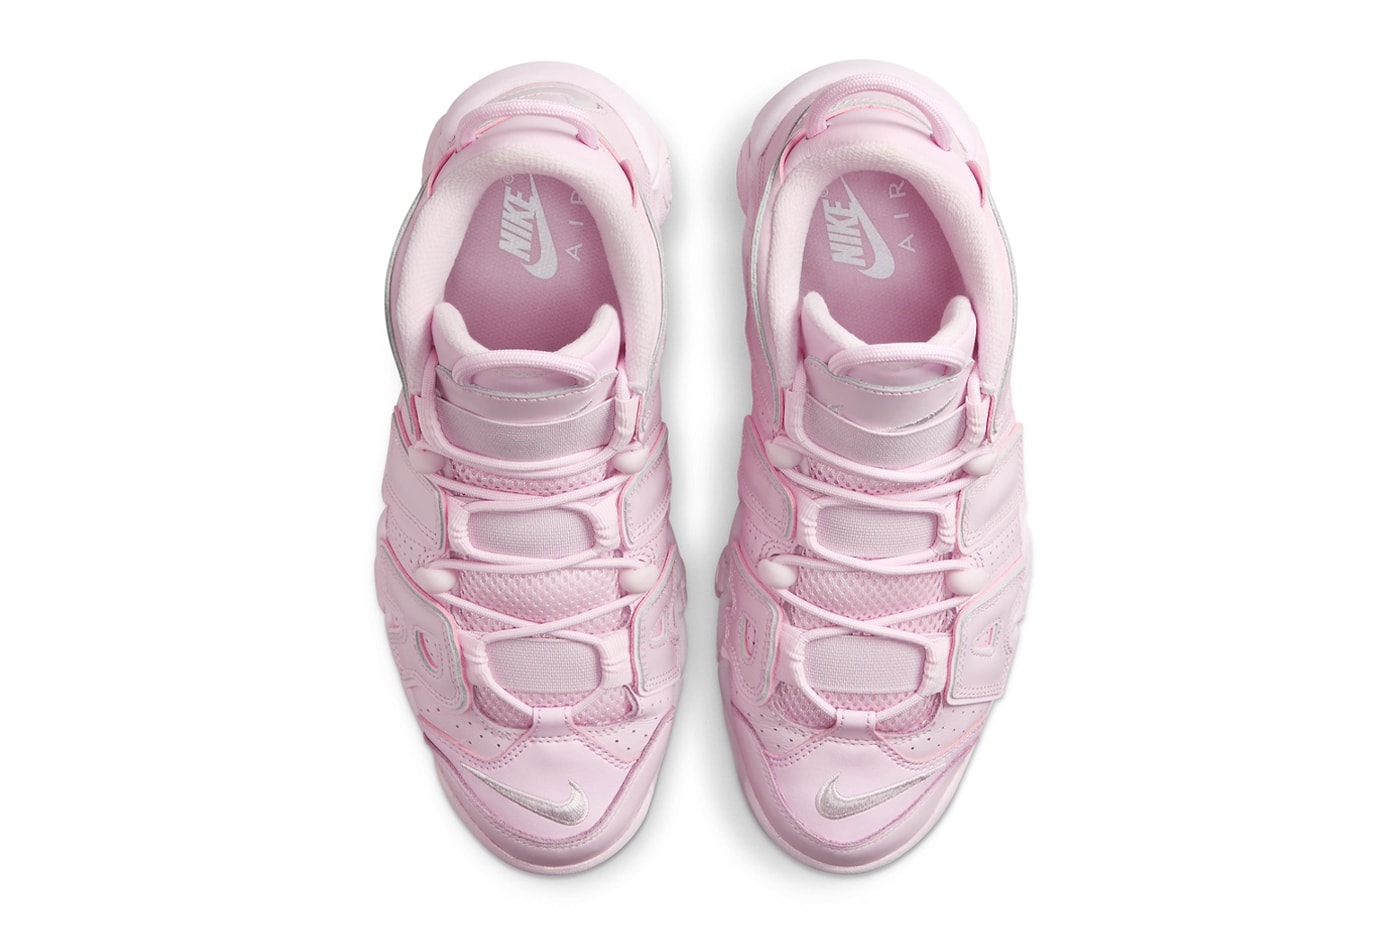 Official Images of the Nike Air More Uptempo "Pink Foam" DV1137-600 pink foam white spring 2024 cotton candy pink scottie pippen basketball retro high top shoe